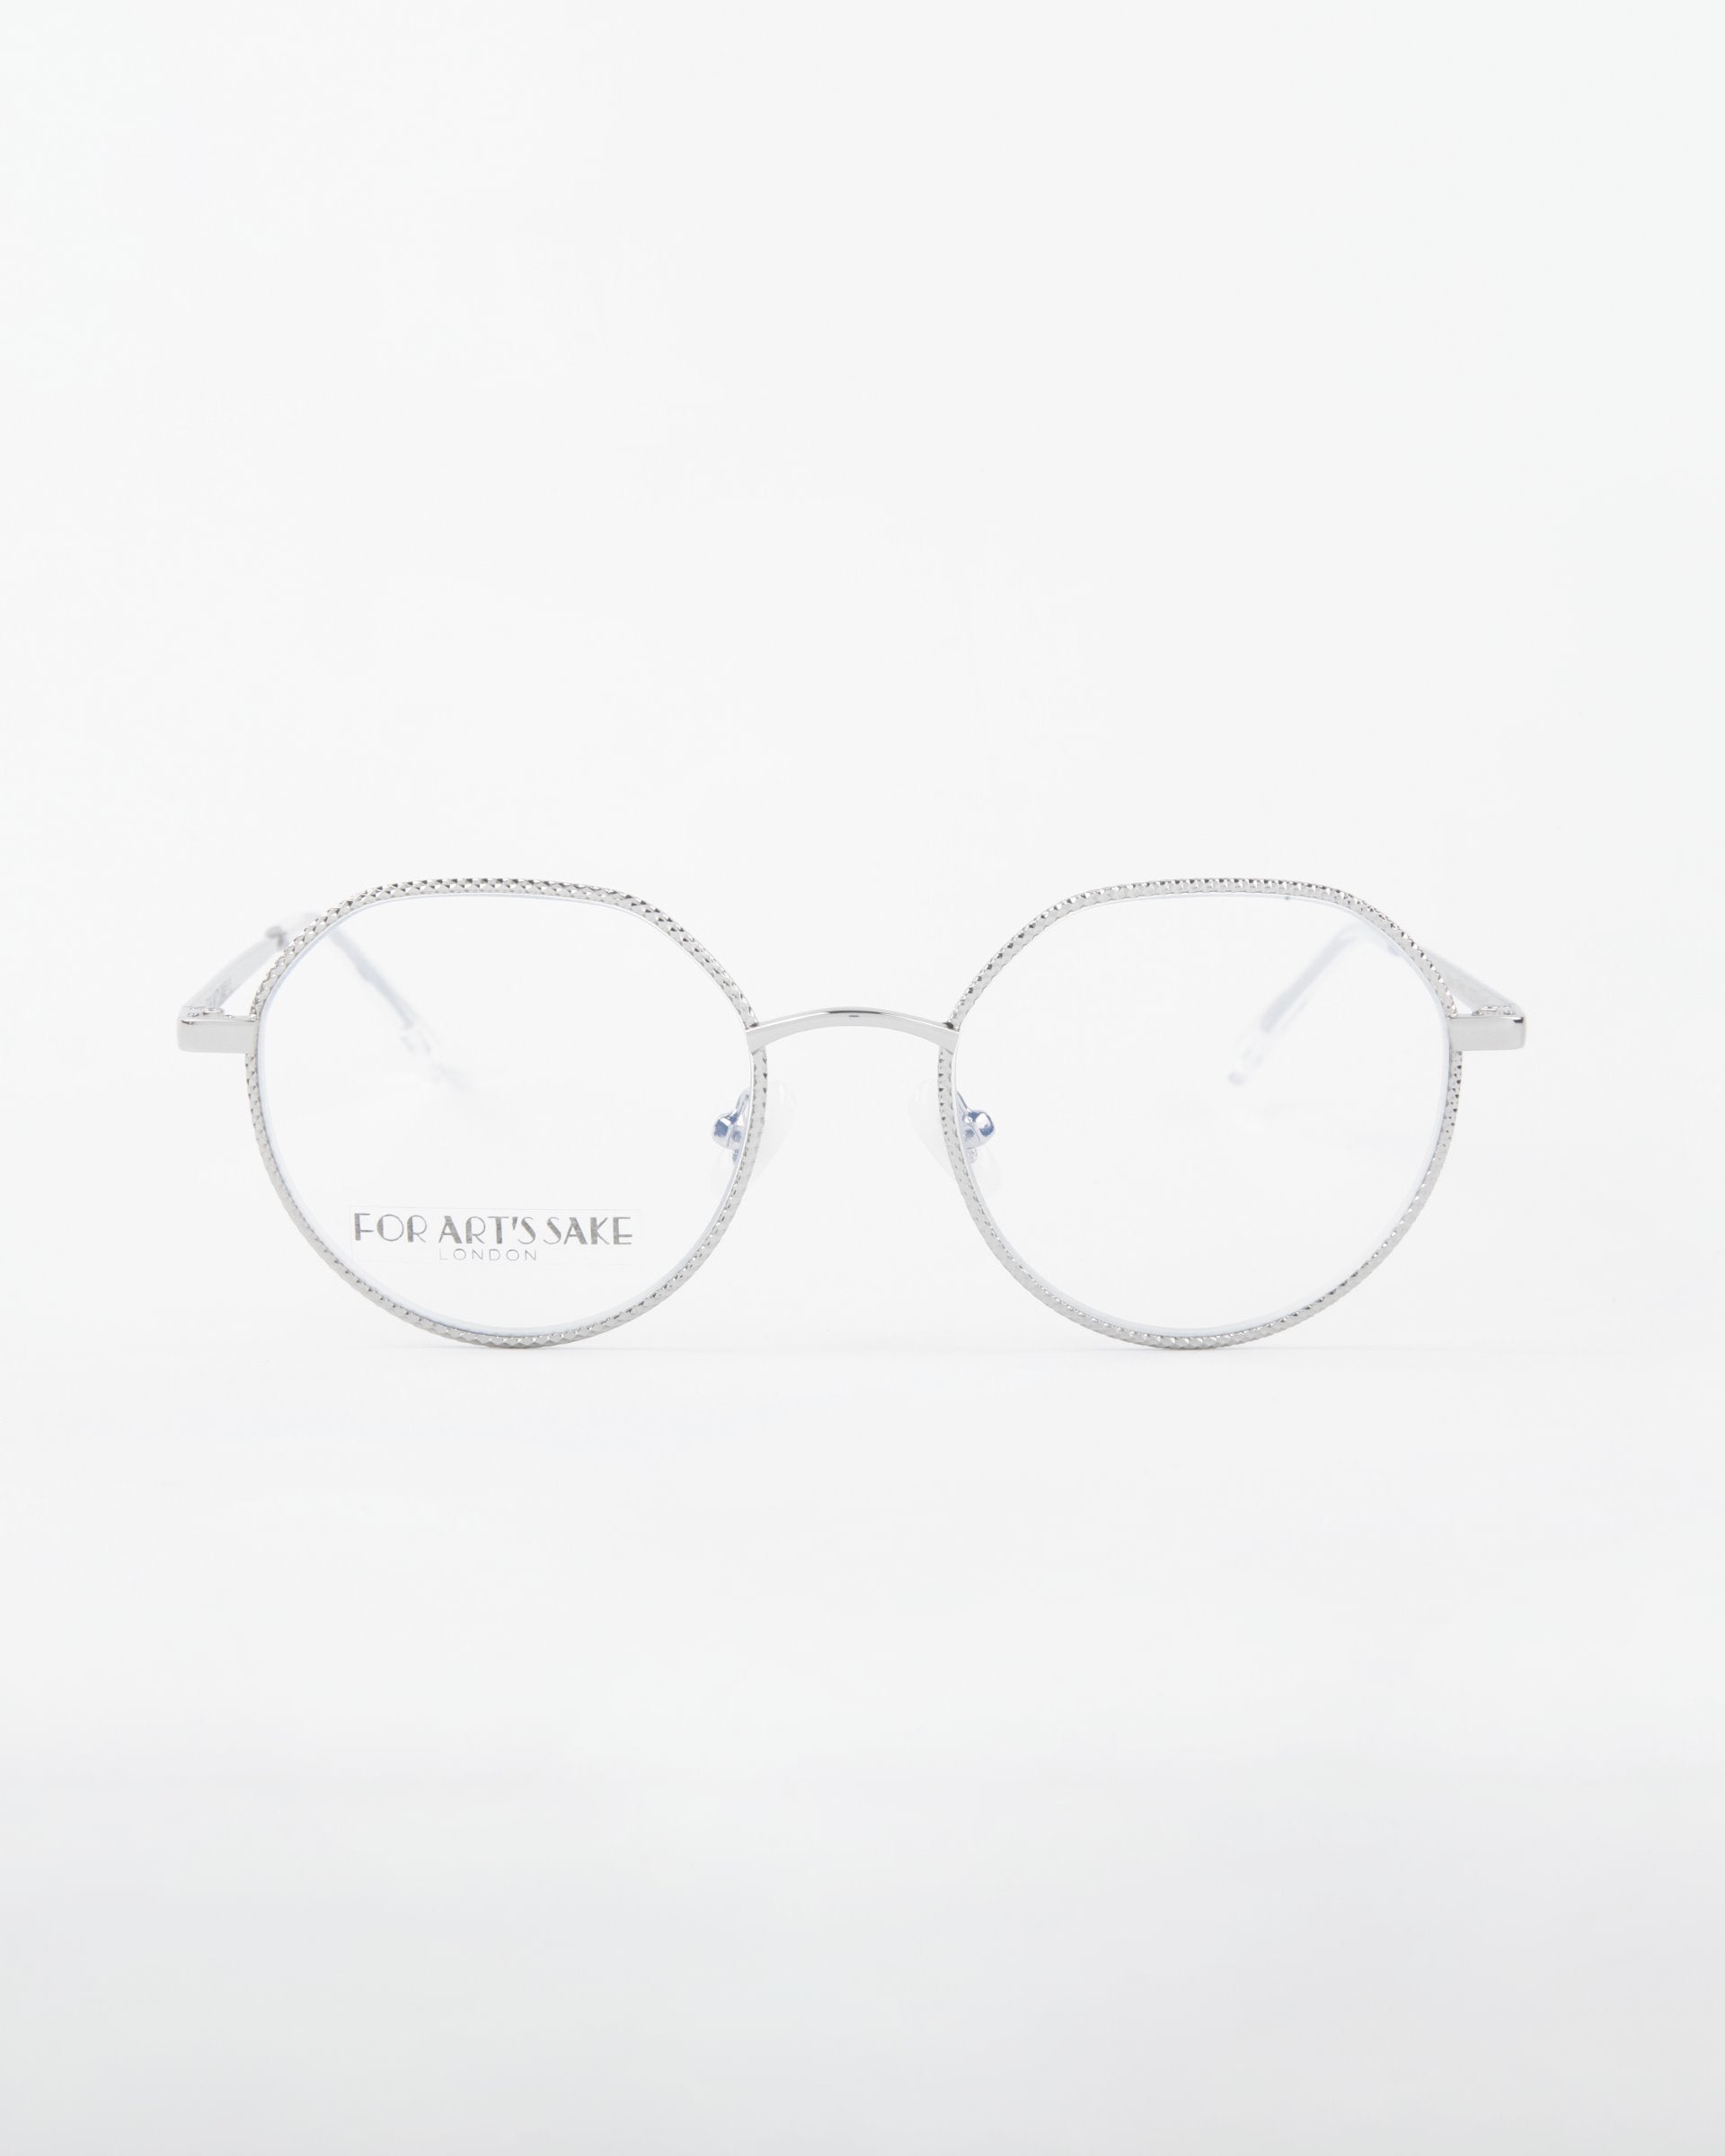 A pair of round, silver-framed eyeglasses with a delicate design, featuring an 18-karat gold-plated finish. The brand name For Art's Sake® is subtly inscribed on the left lens. The background is a clean, minimalistic white. This elegant piece is aptly named "Hope.